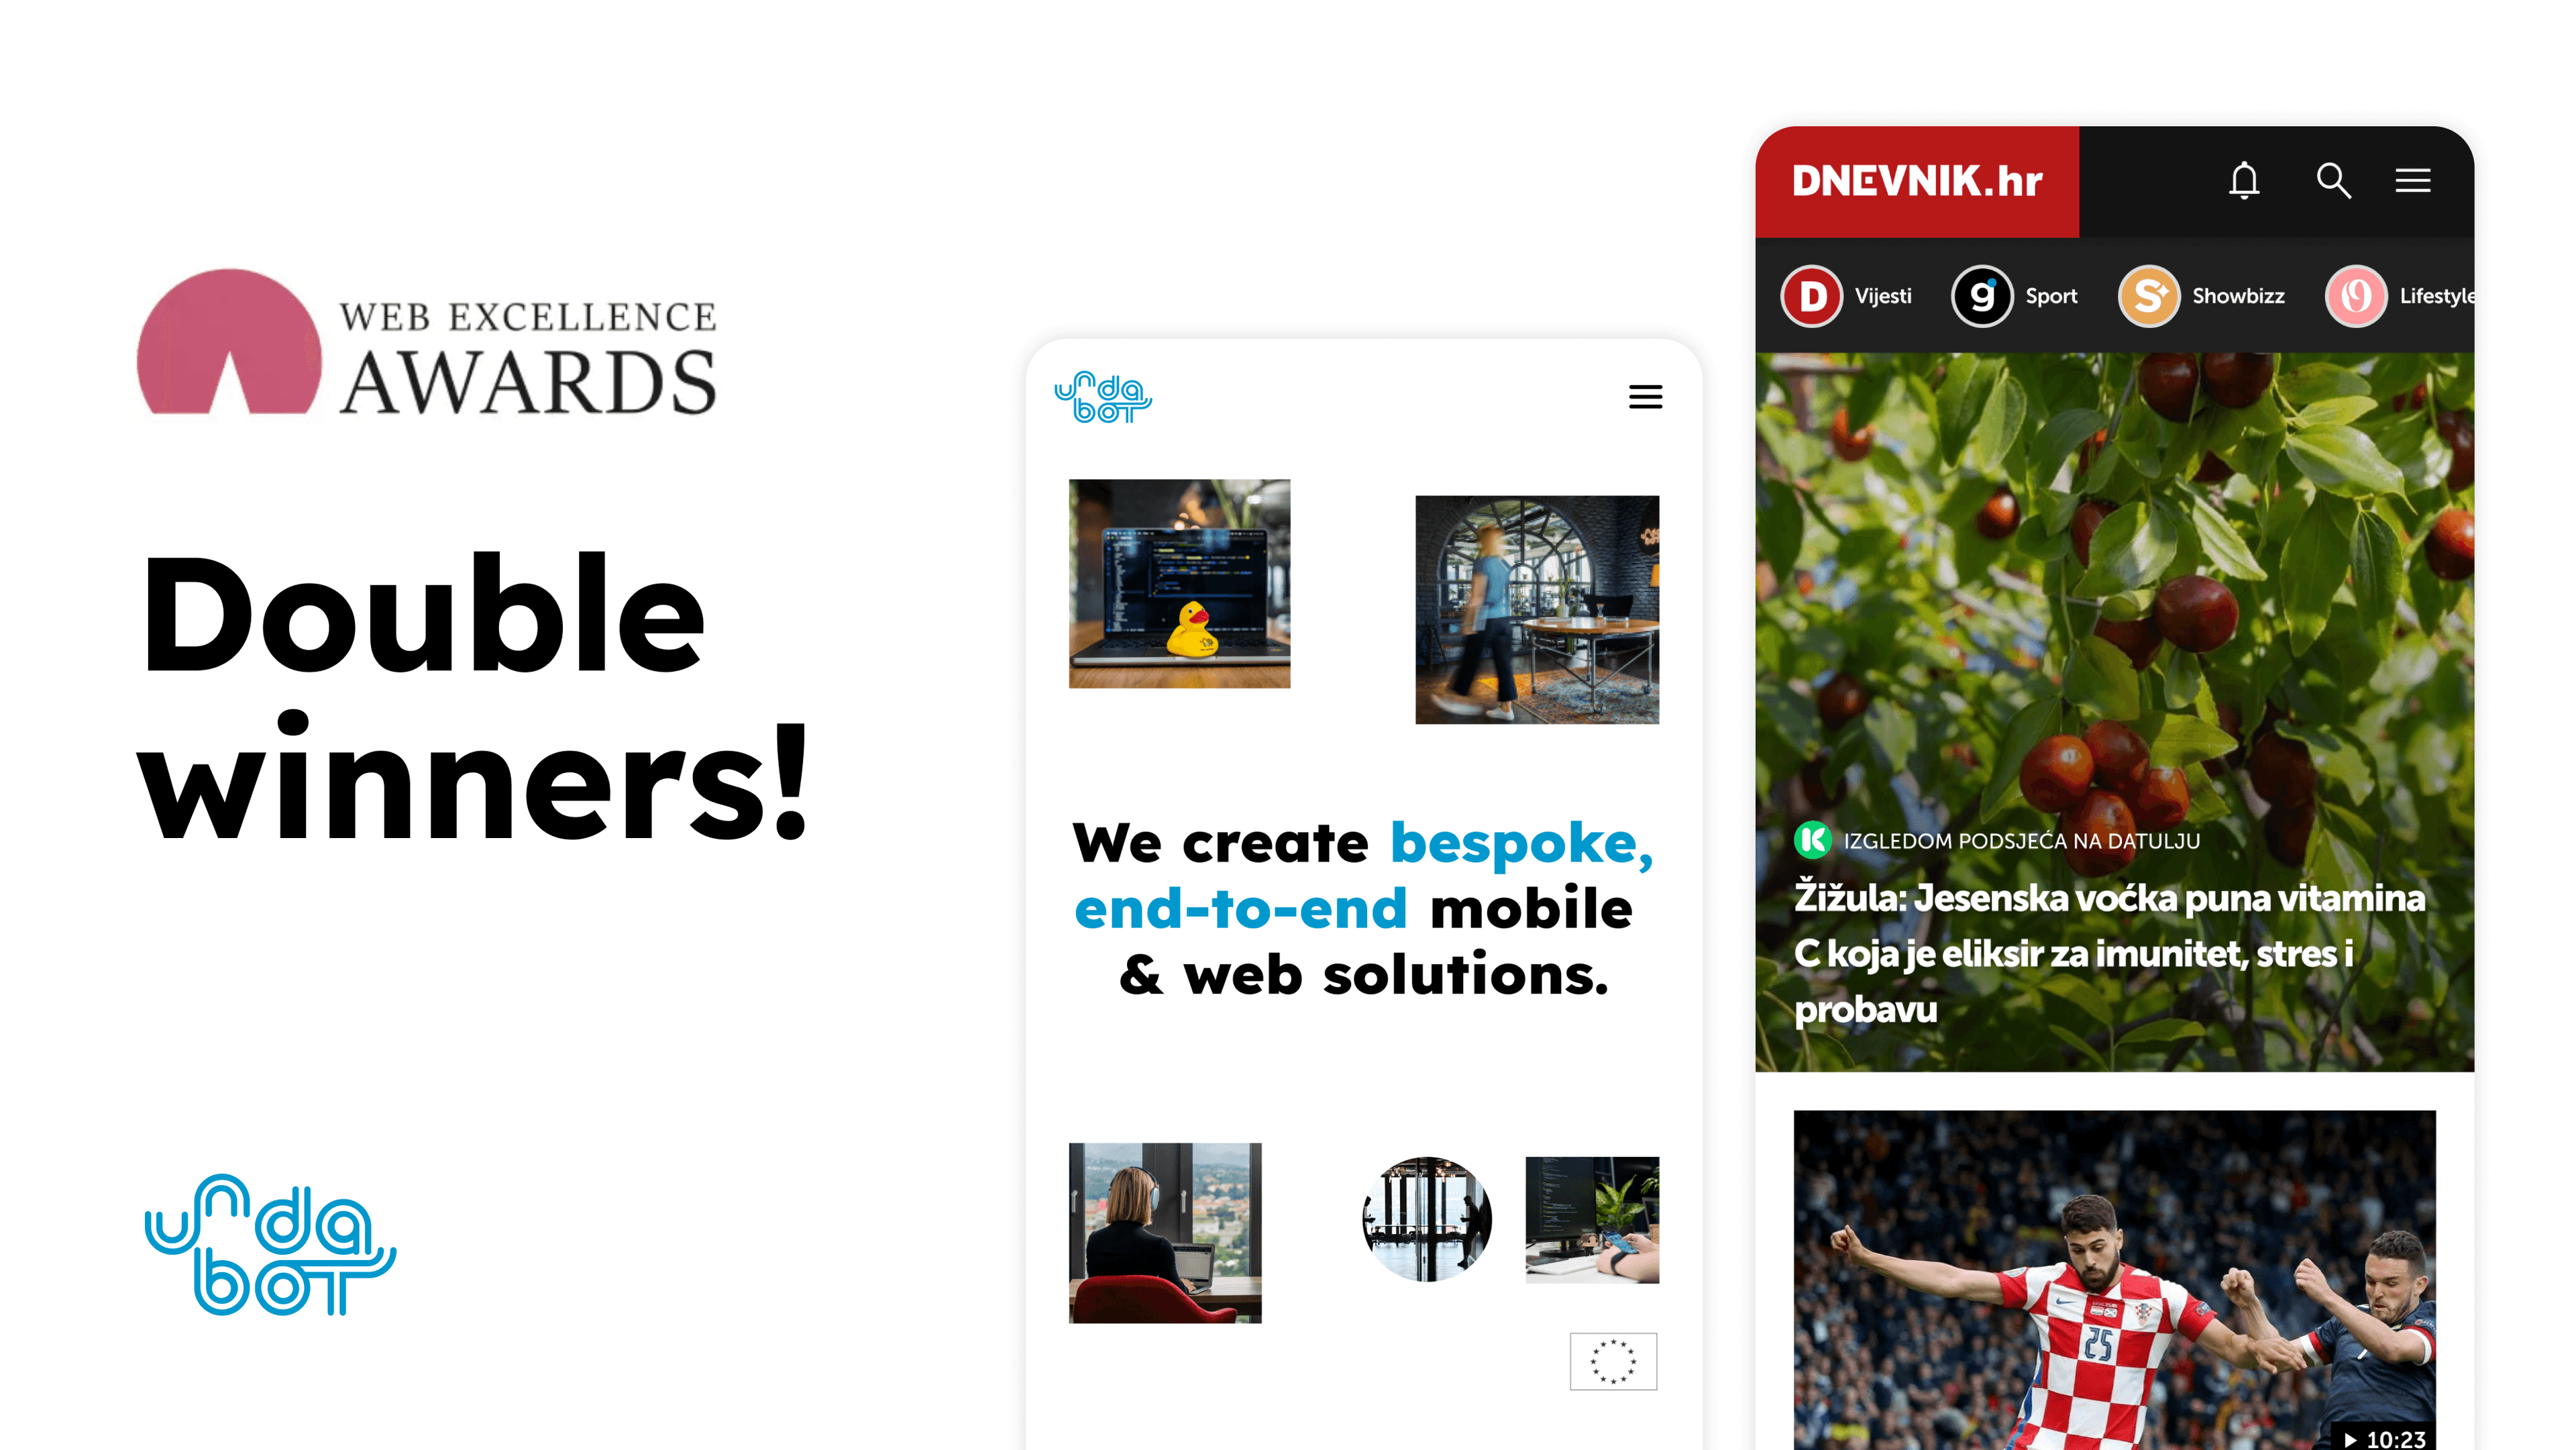 Double Web Excellence Awards win for Undabot.png